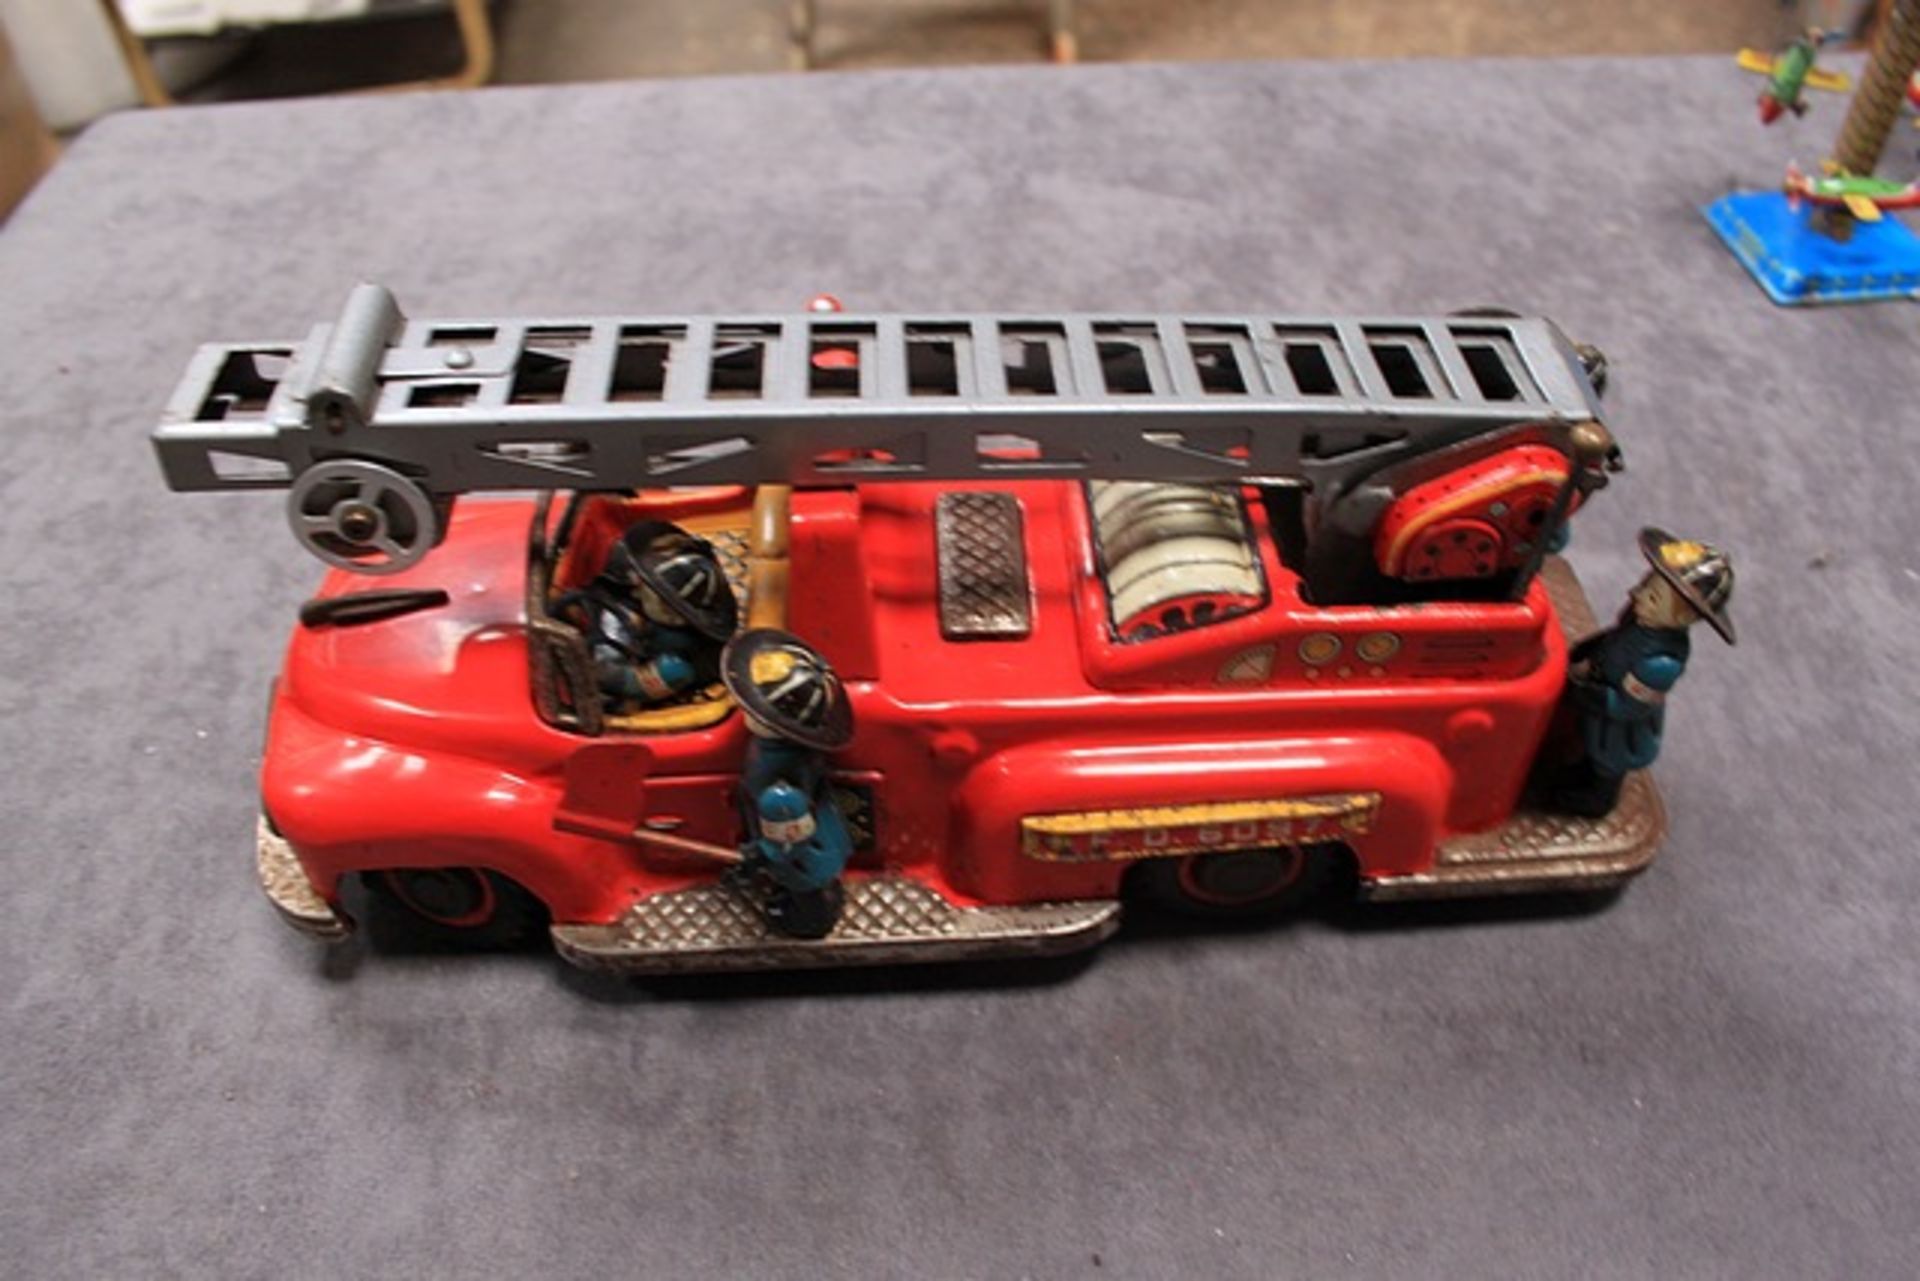 TN Nomura (Japan) FD 6097 Electro Fire Truck Battery Operated Tin Litho 10.5 Inches Long 1950s Toy - Image 2 of 2